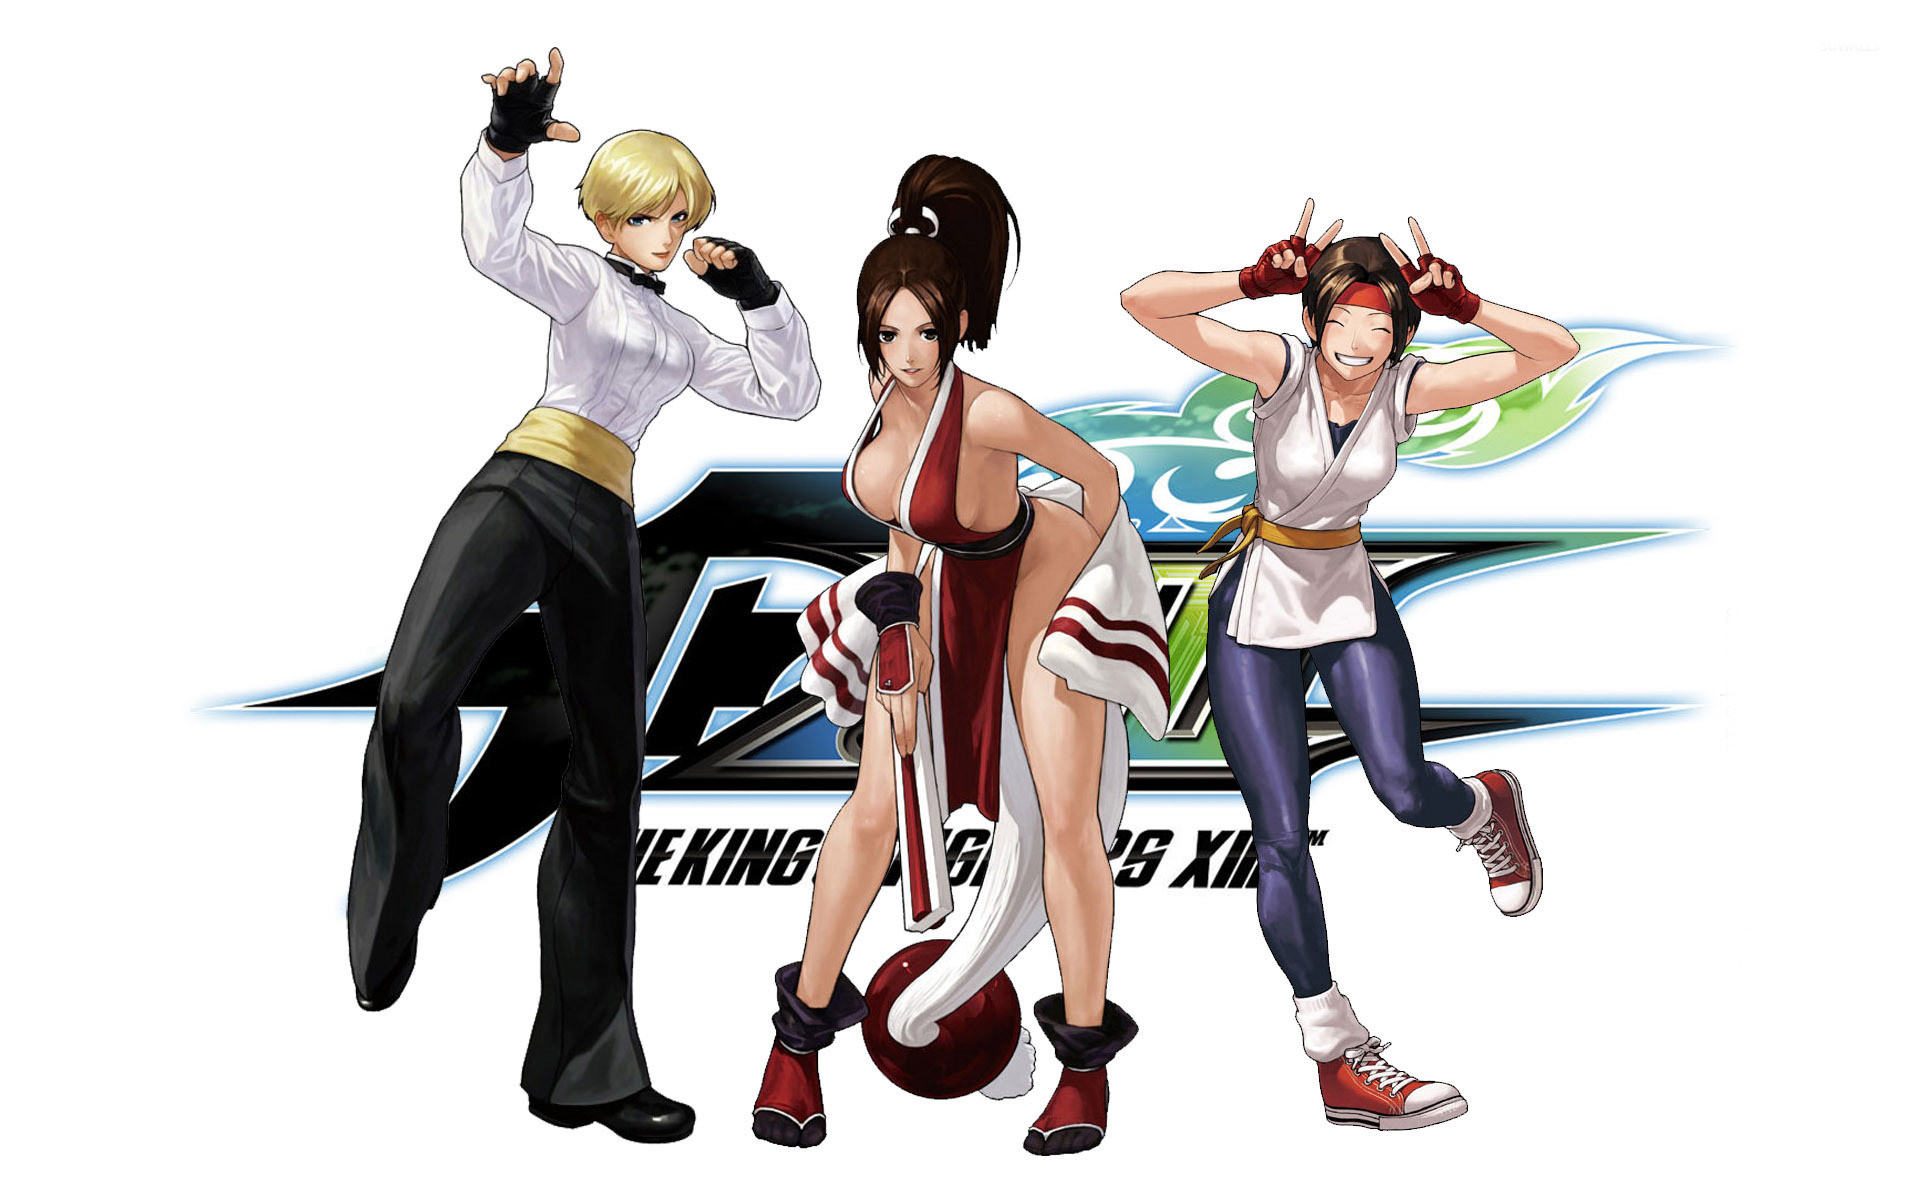 1920x1200 The King of Fighters [2] wallpaper  jpg